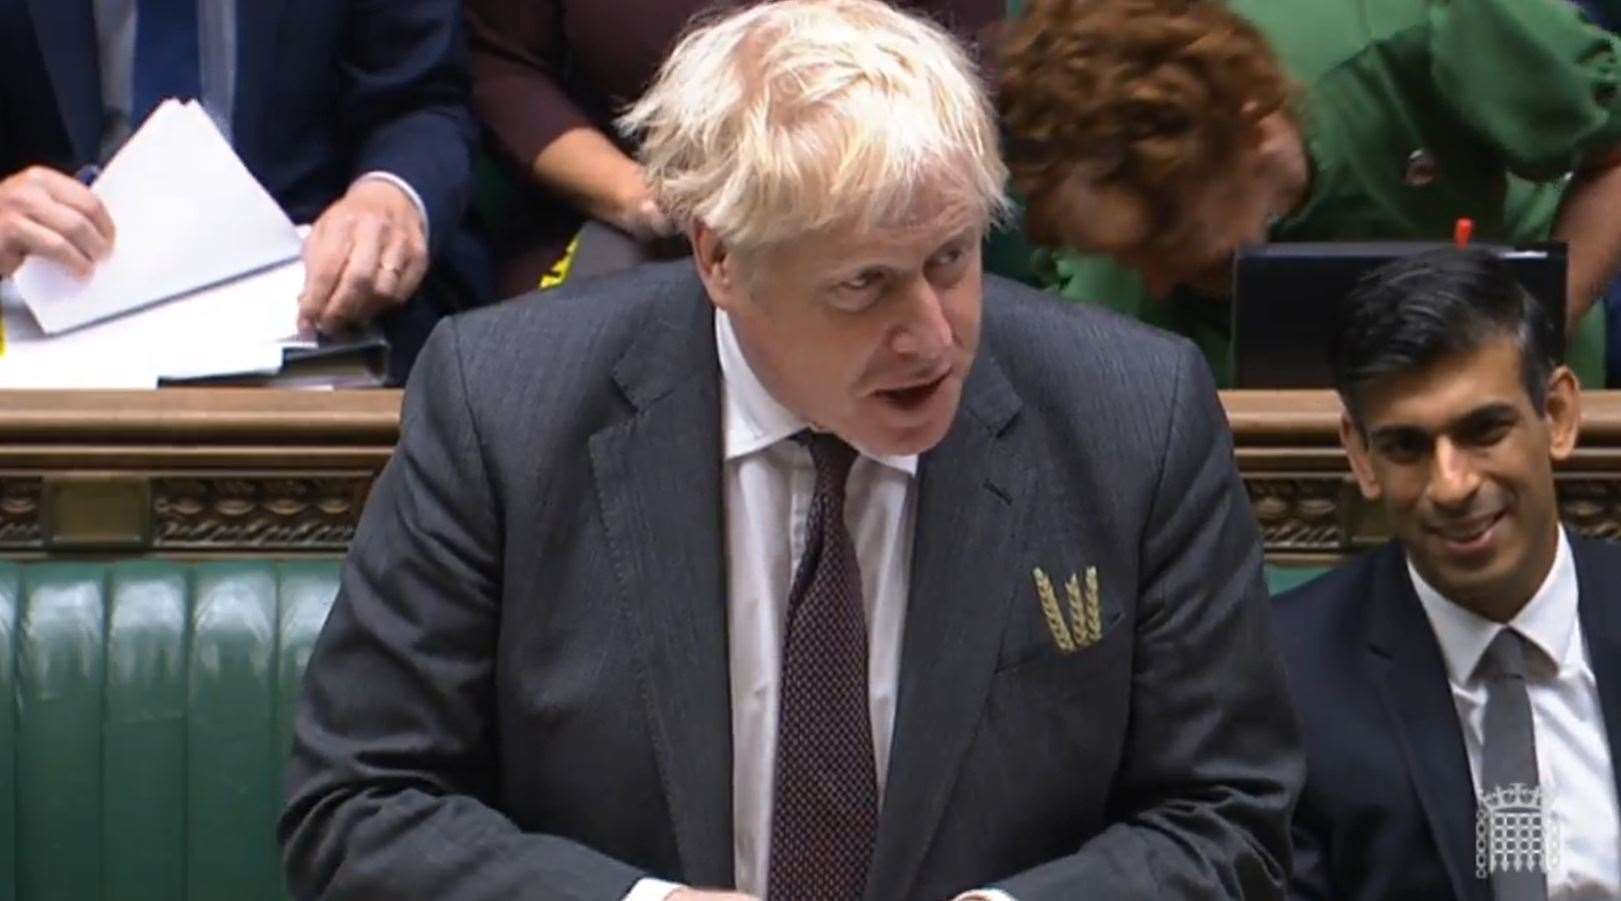 Boris Johnson speaks during Prime Minister’s Questions in the House of Commons (House of Commons/PA)